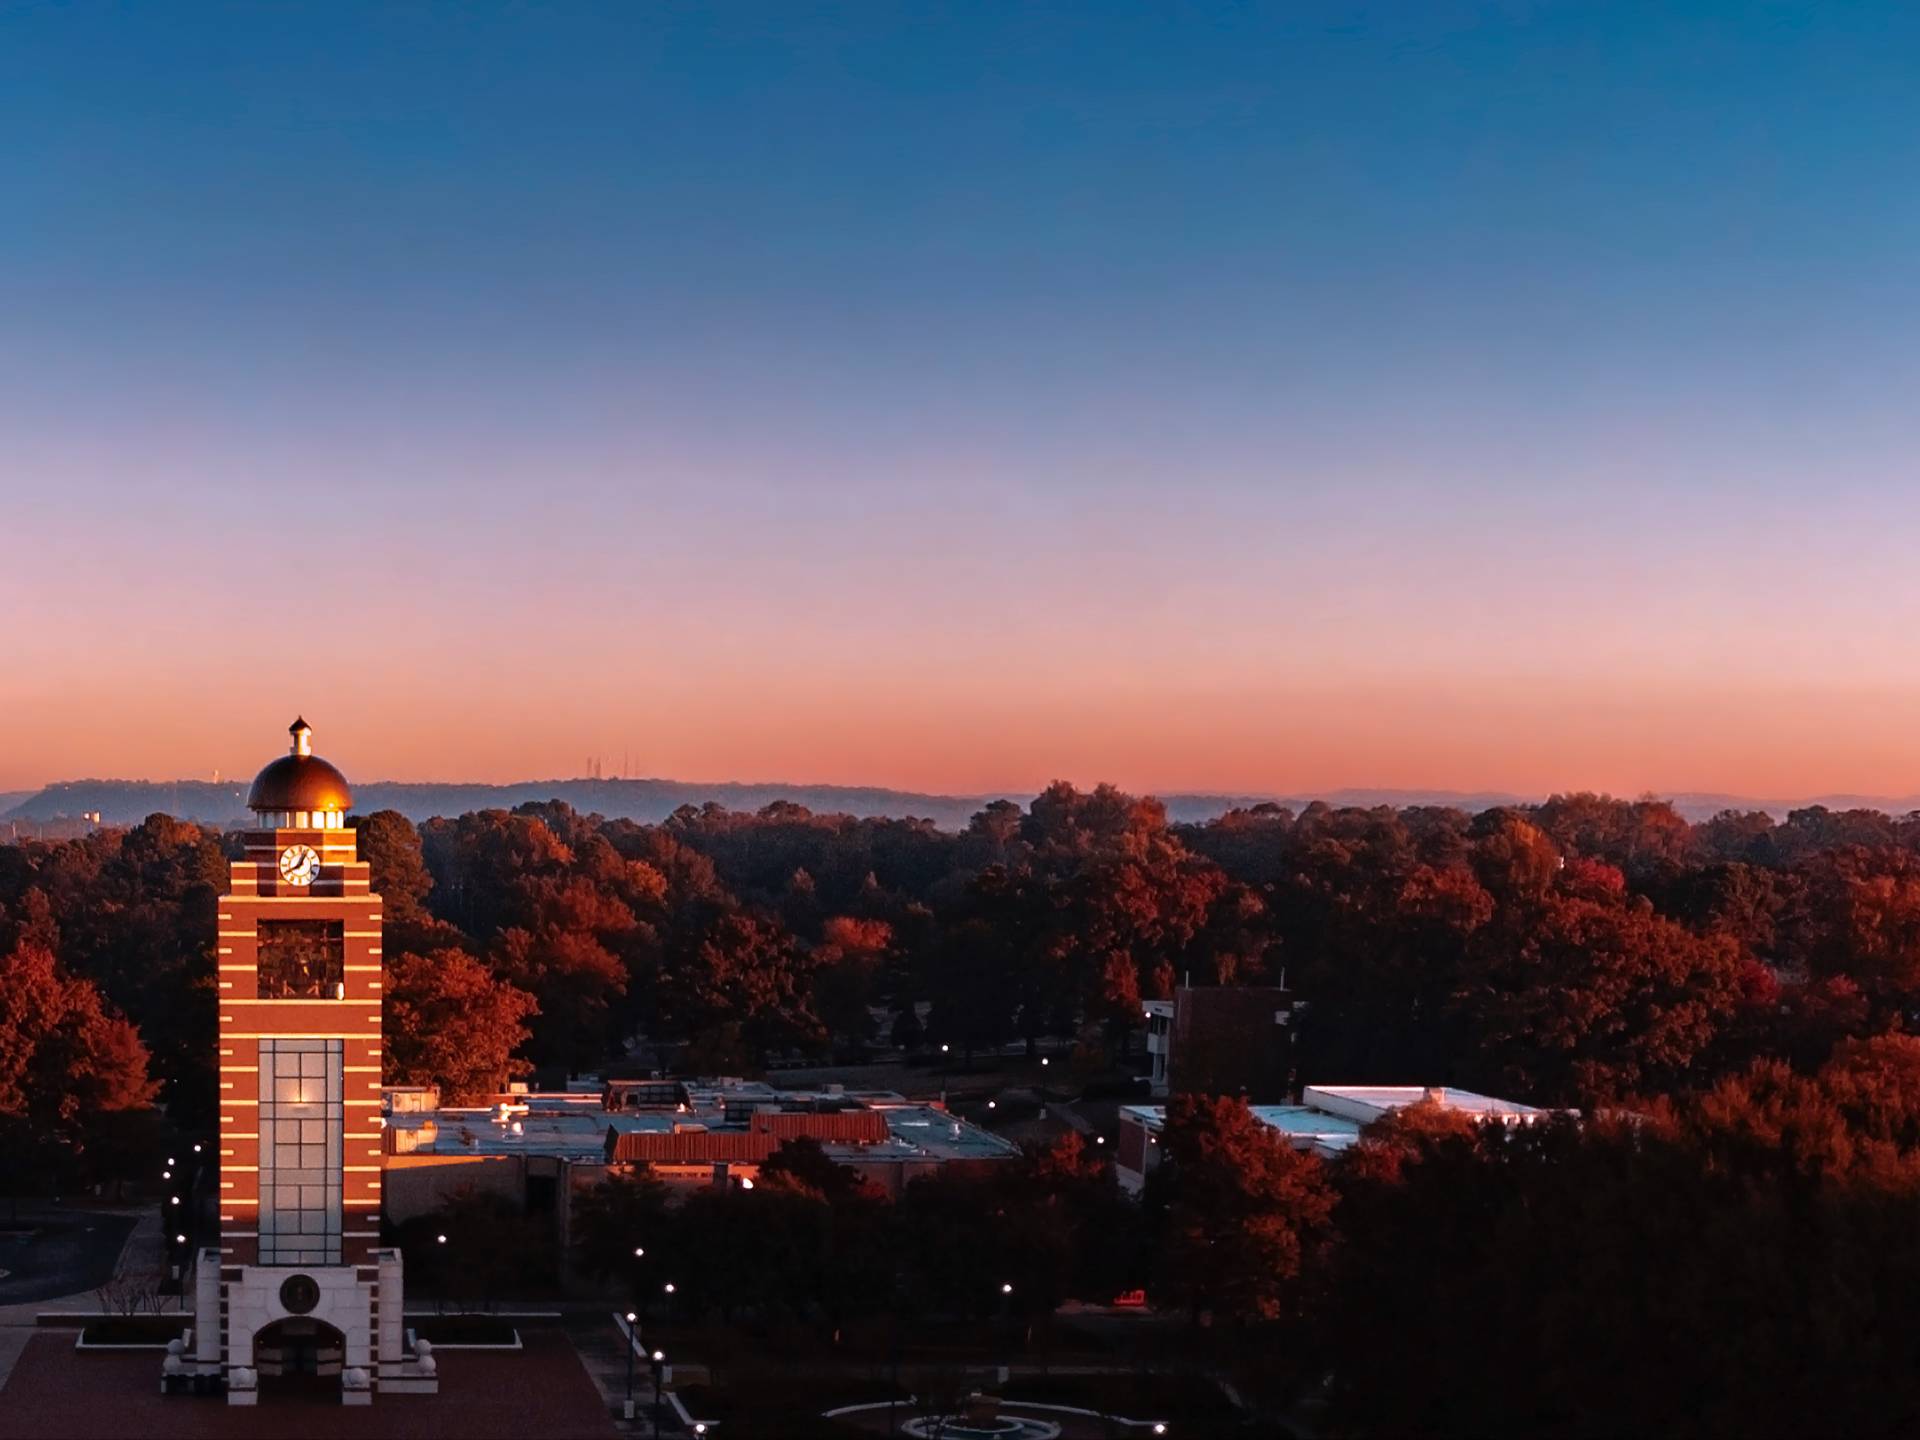 The Bell Tower at sunset